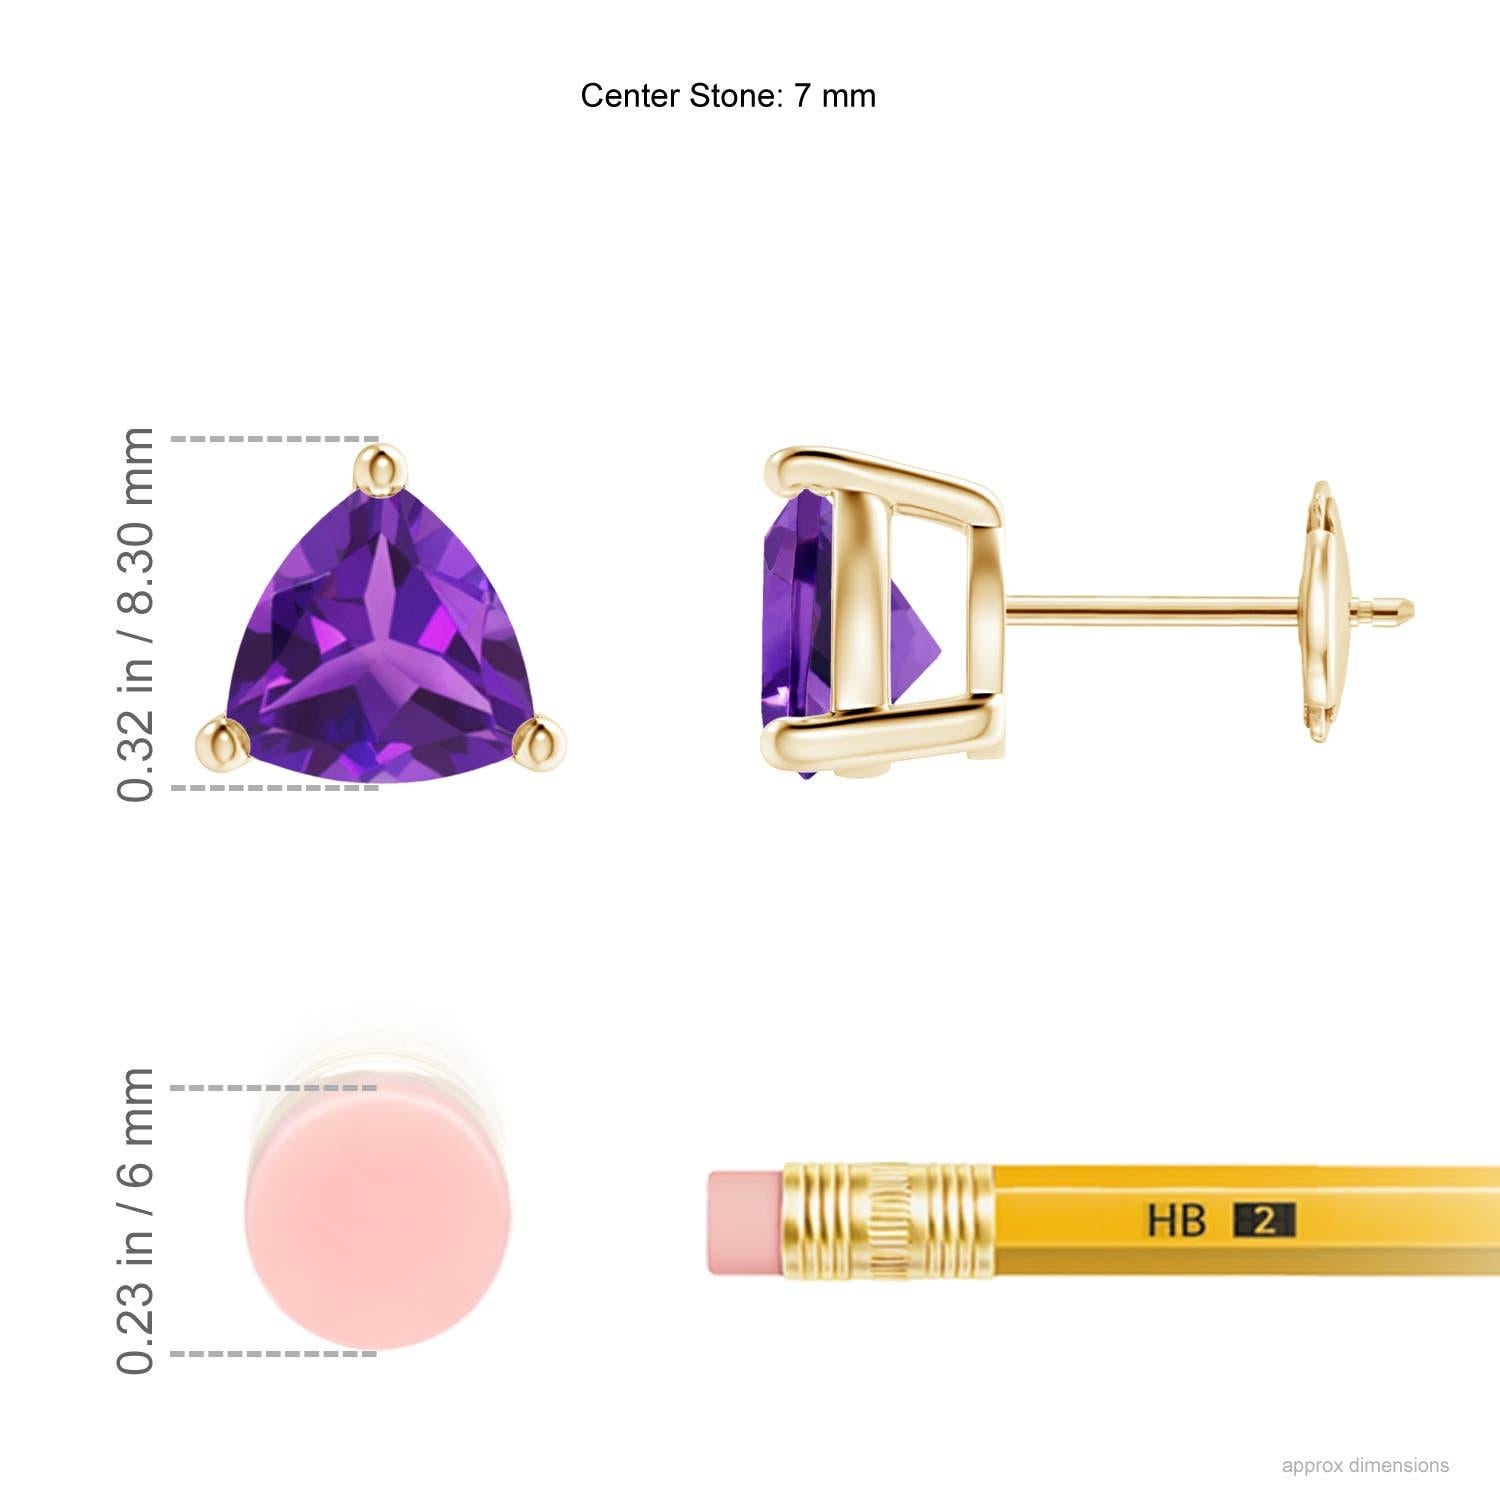 Displaying the royal purple amethysts in a prong setting, these solitaire stud earrings are a pair of enviable beauty. The gemstones are cut in a striking trillion shape and mounted in 14k yellow gold.